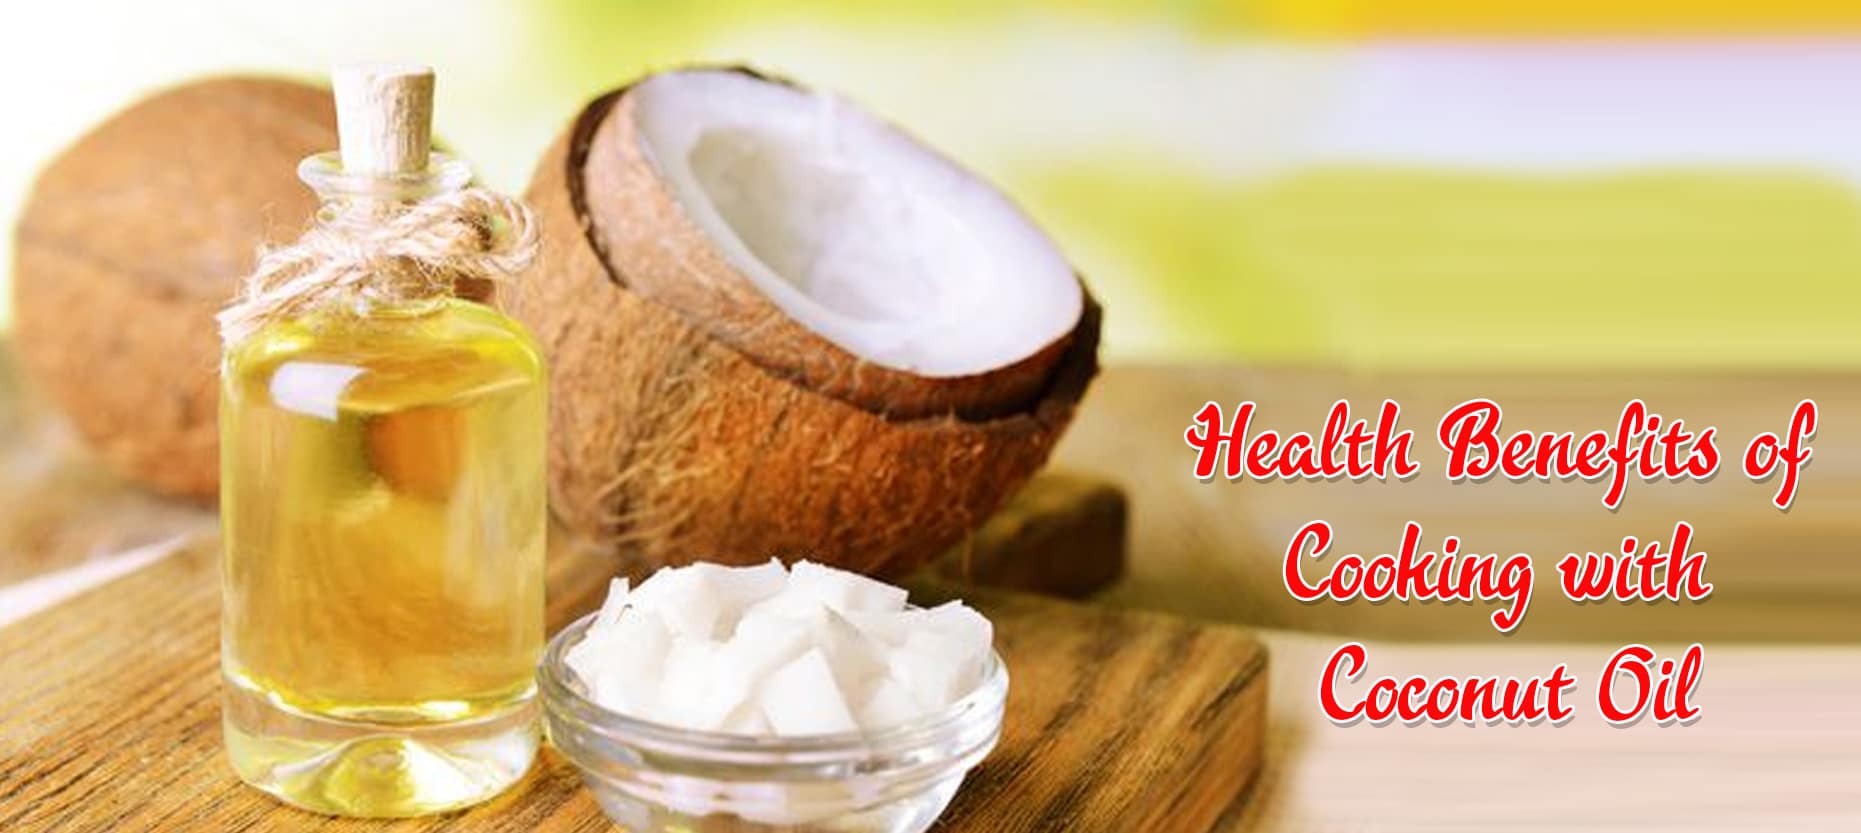 Health Benefits of Cooking with Coconut Oil